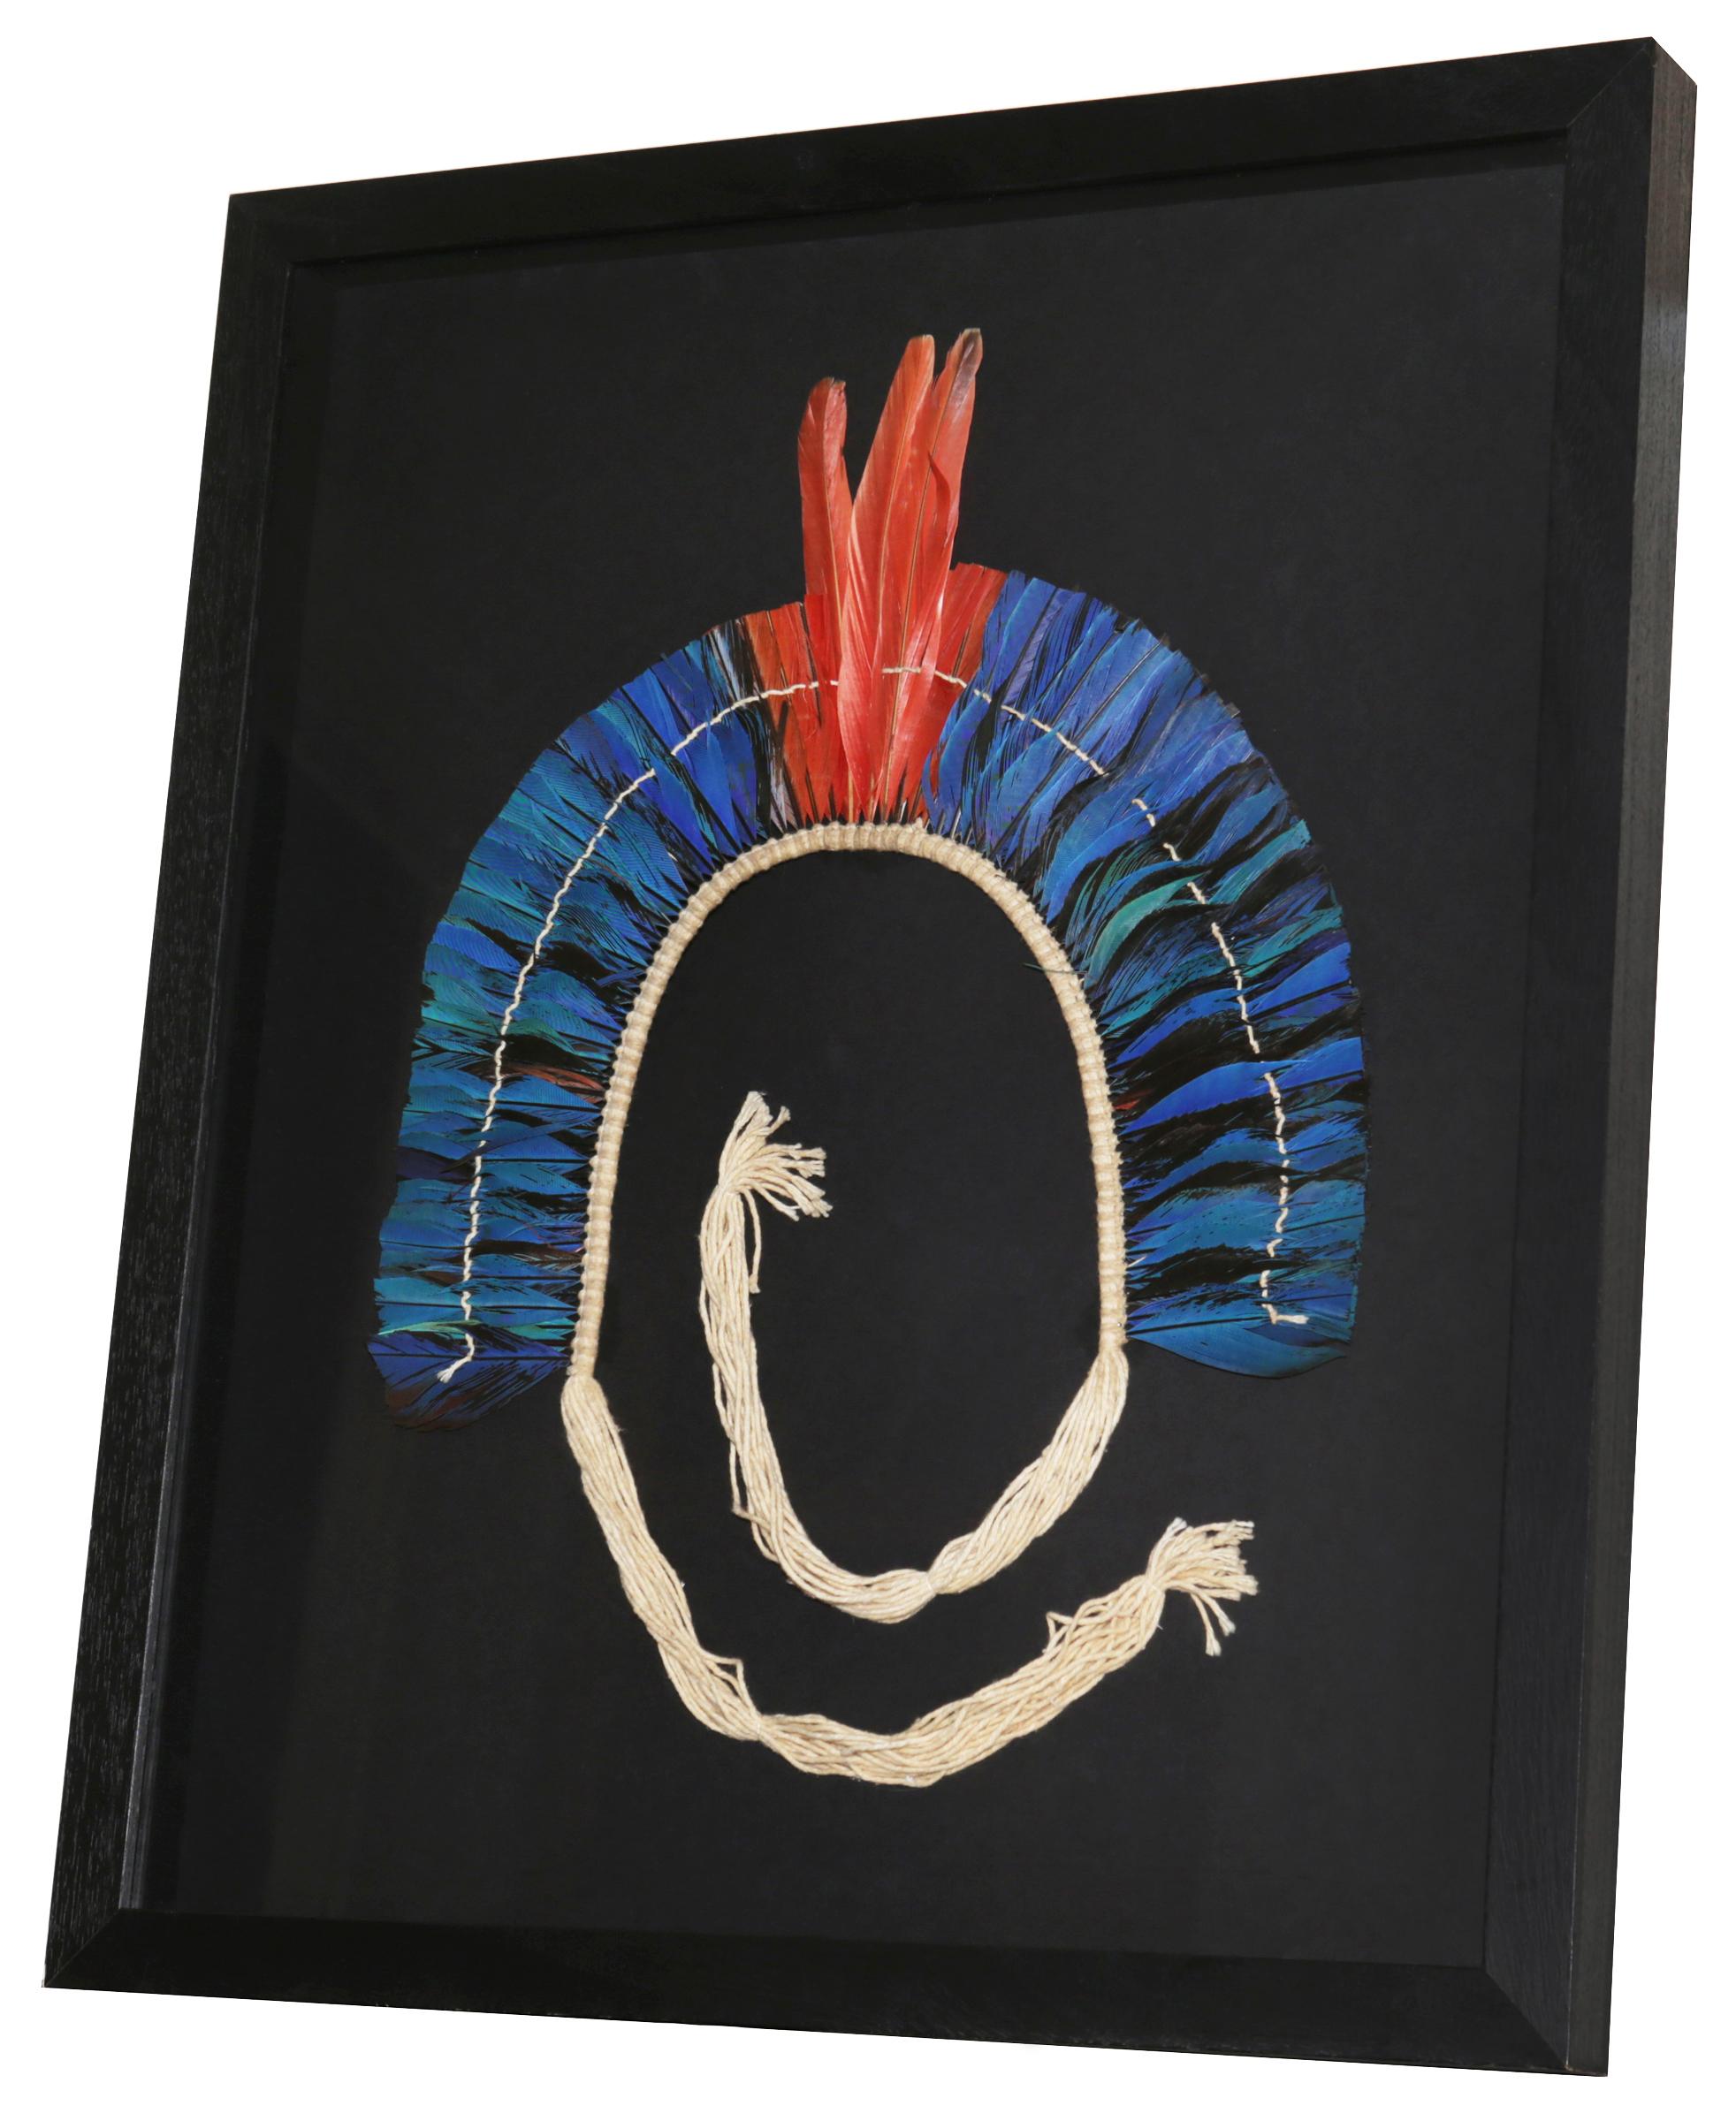 Headdress Kayapo 4 with natural feathers and
with cotton frame. Under glass with black wooden
frame. From Kayapo ethnic tribe, particularly from 
Mekragnoti tribe. From Rio Chiche, southeast Para 
state in Brazil. Pieces collected by Sir André